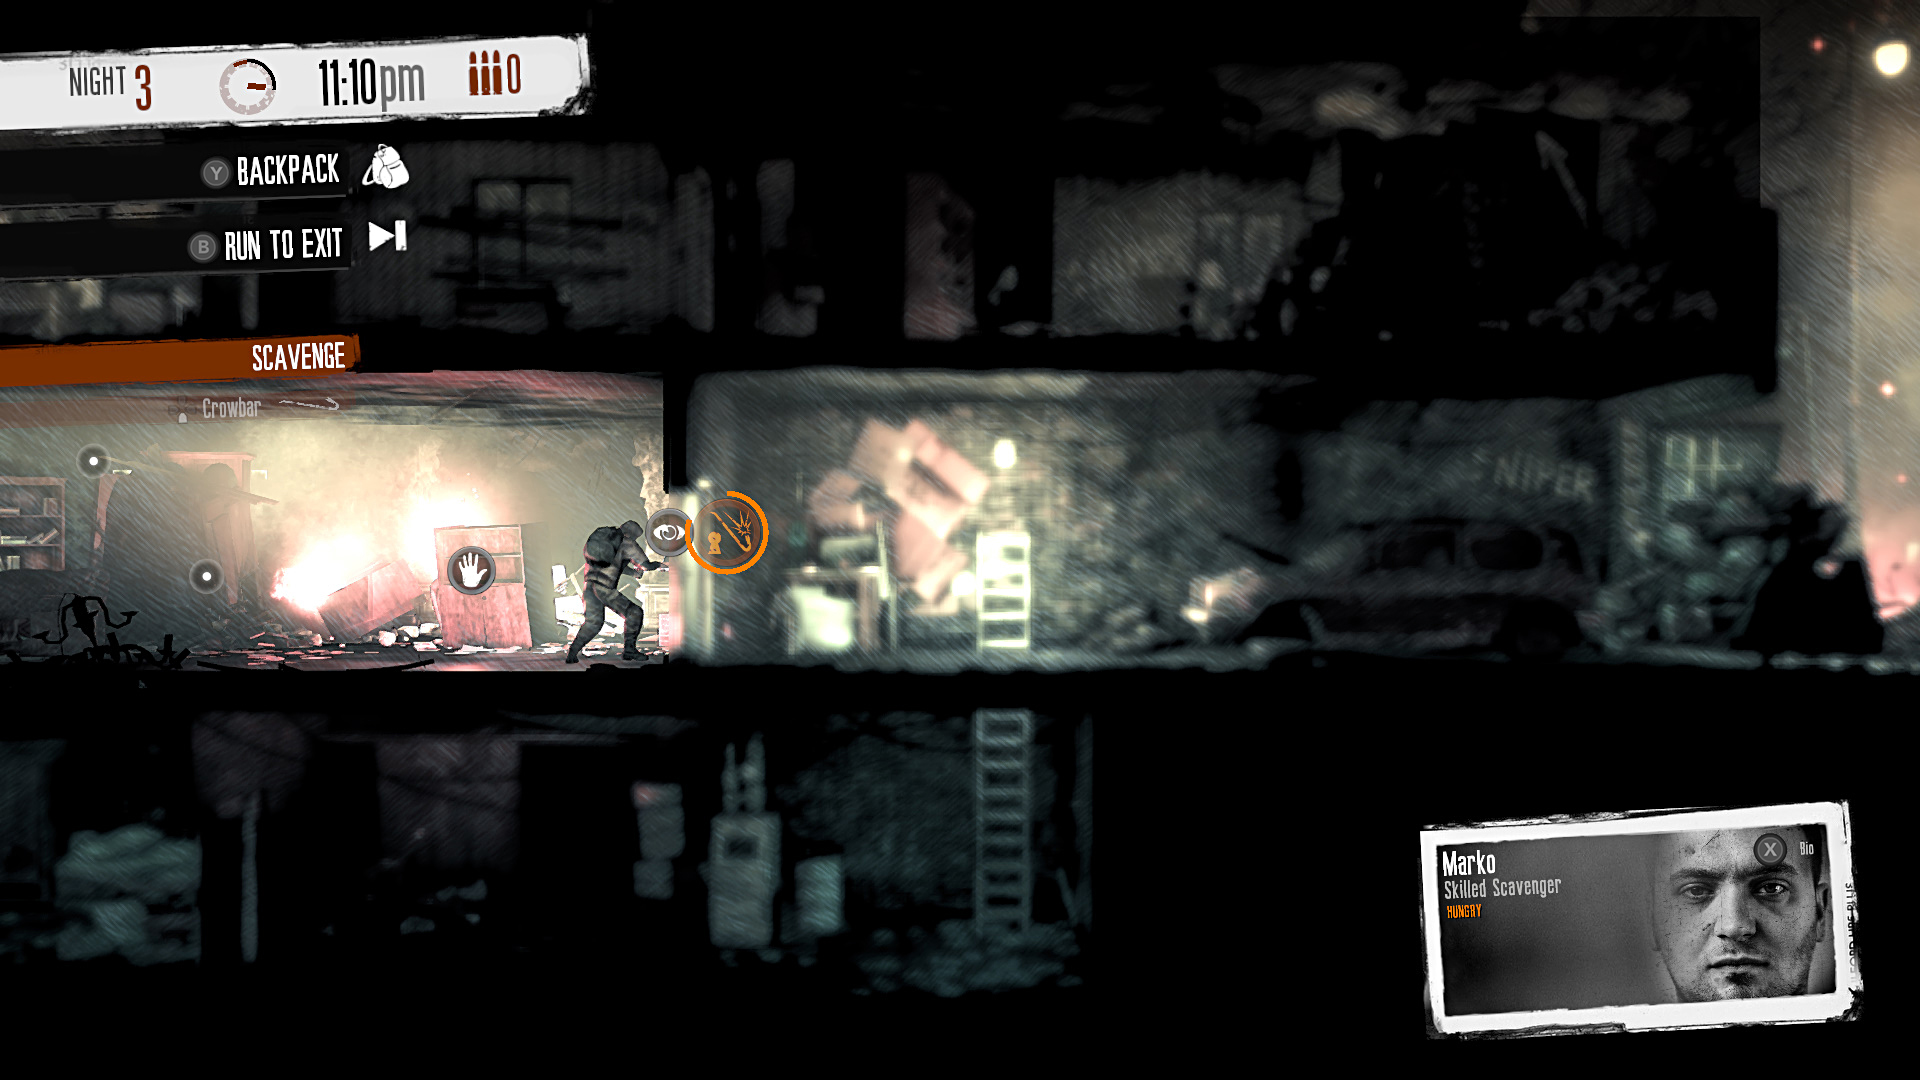 This war of mine fases nocturnas